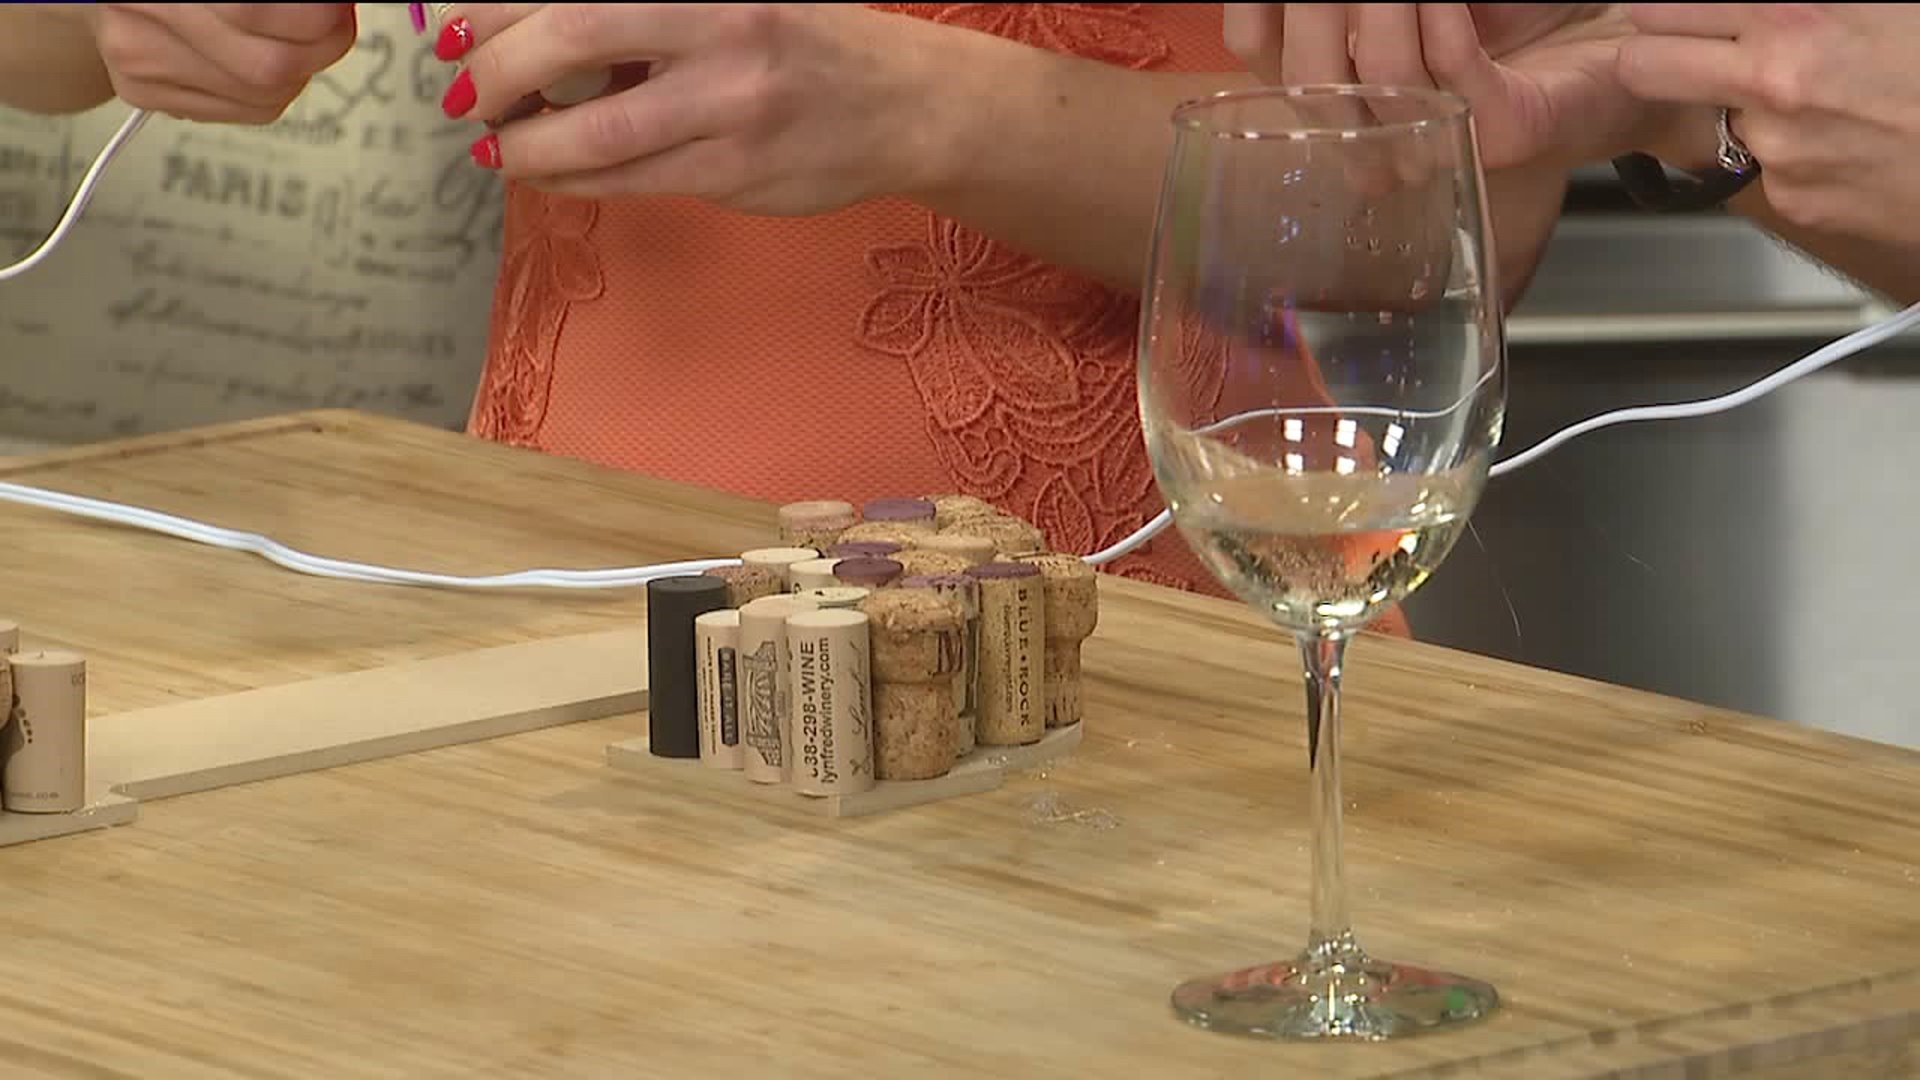 NAILED IT OR FAILED IT: Wine Cork Craft